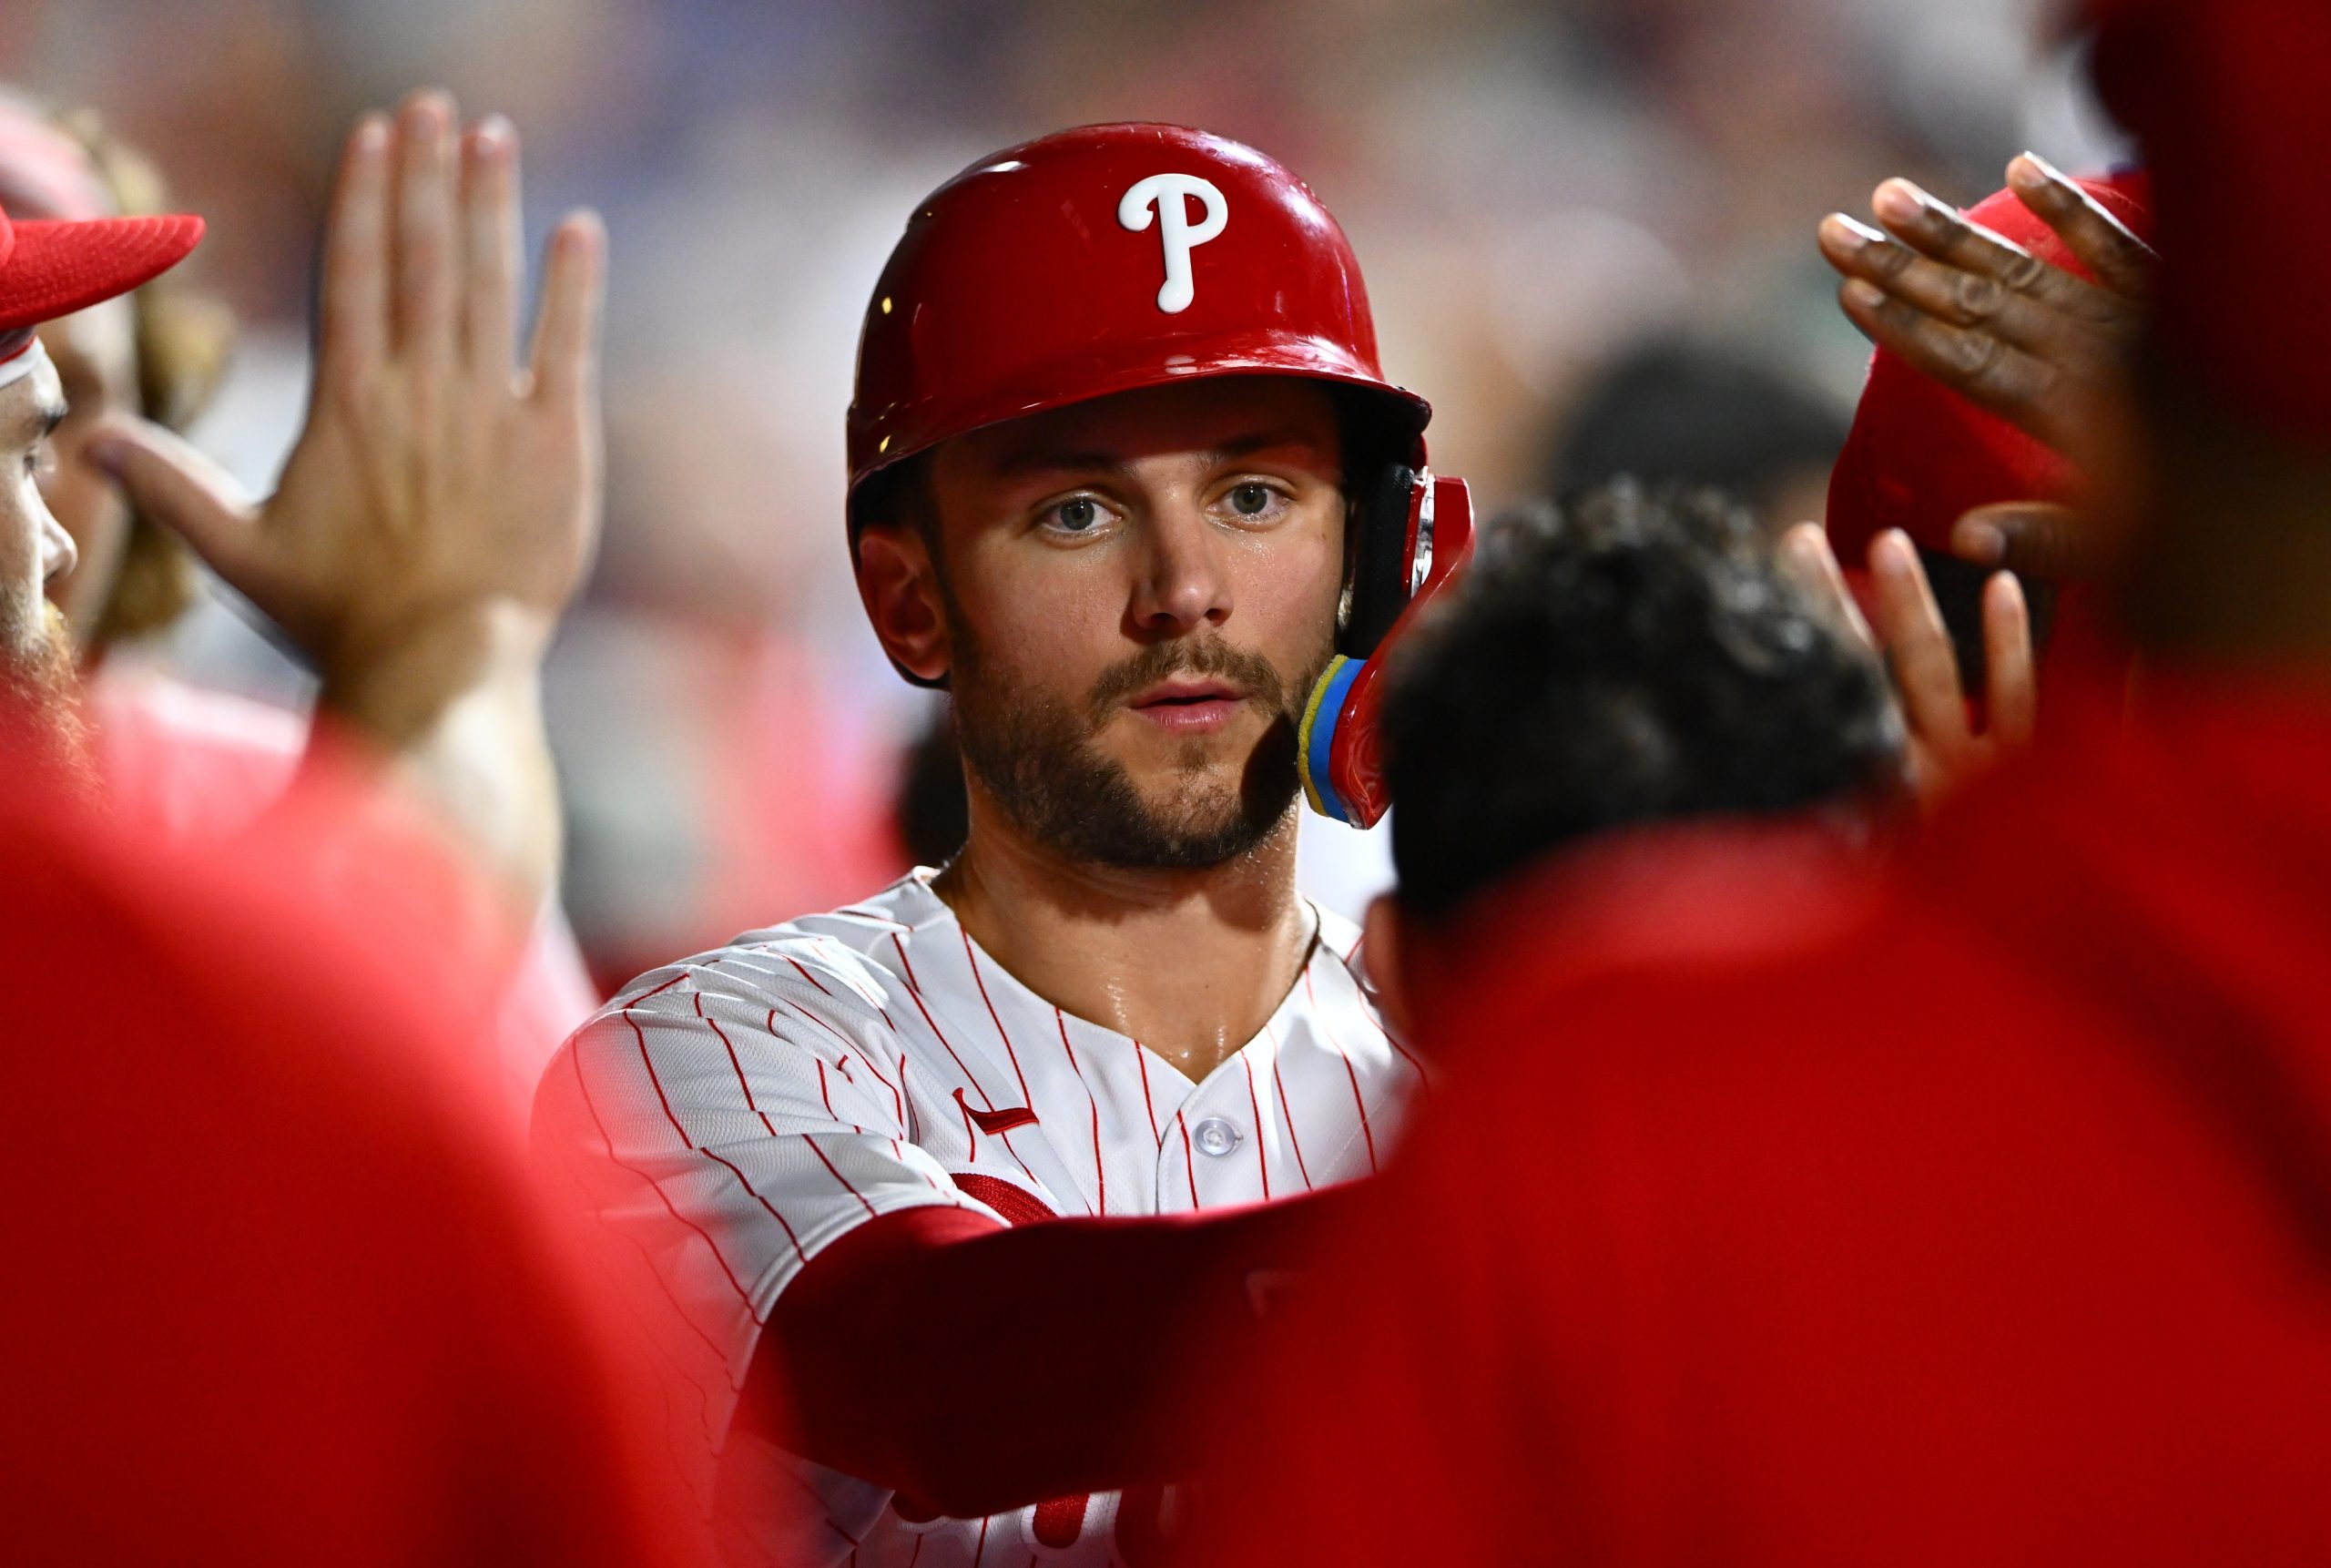 The Road to The Show™: Philadelphia Phillies outfielder Justin Crawford